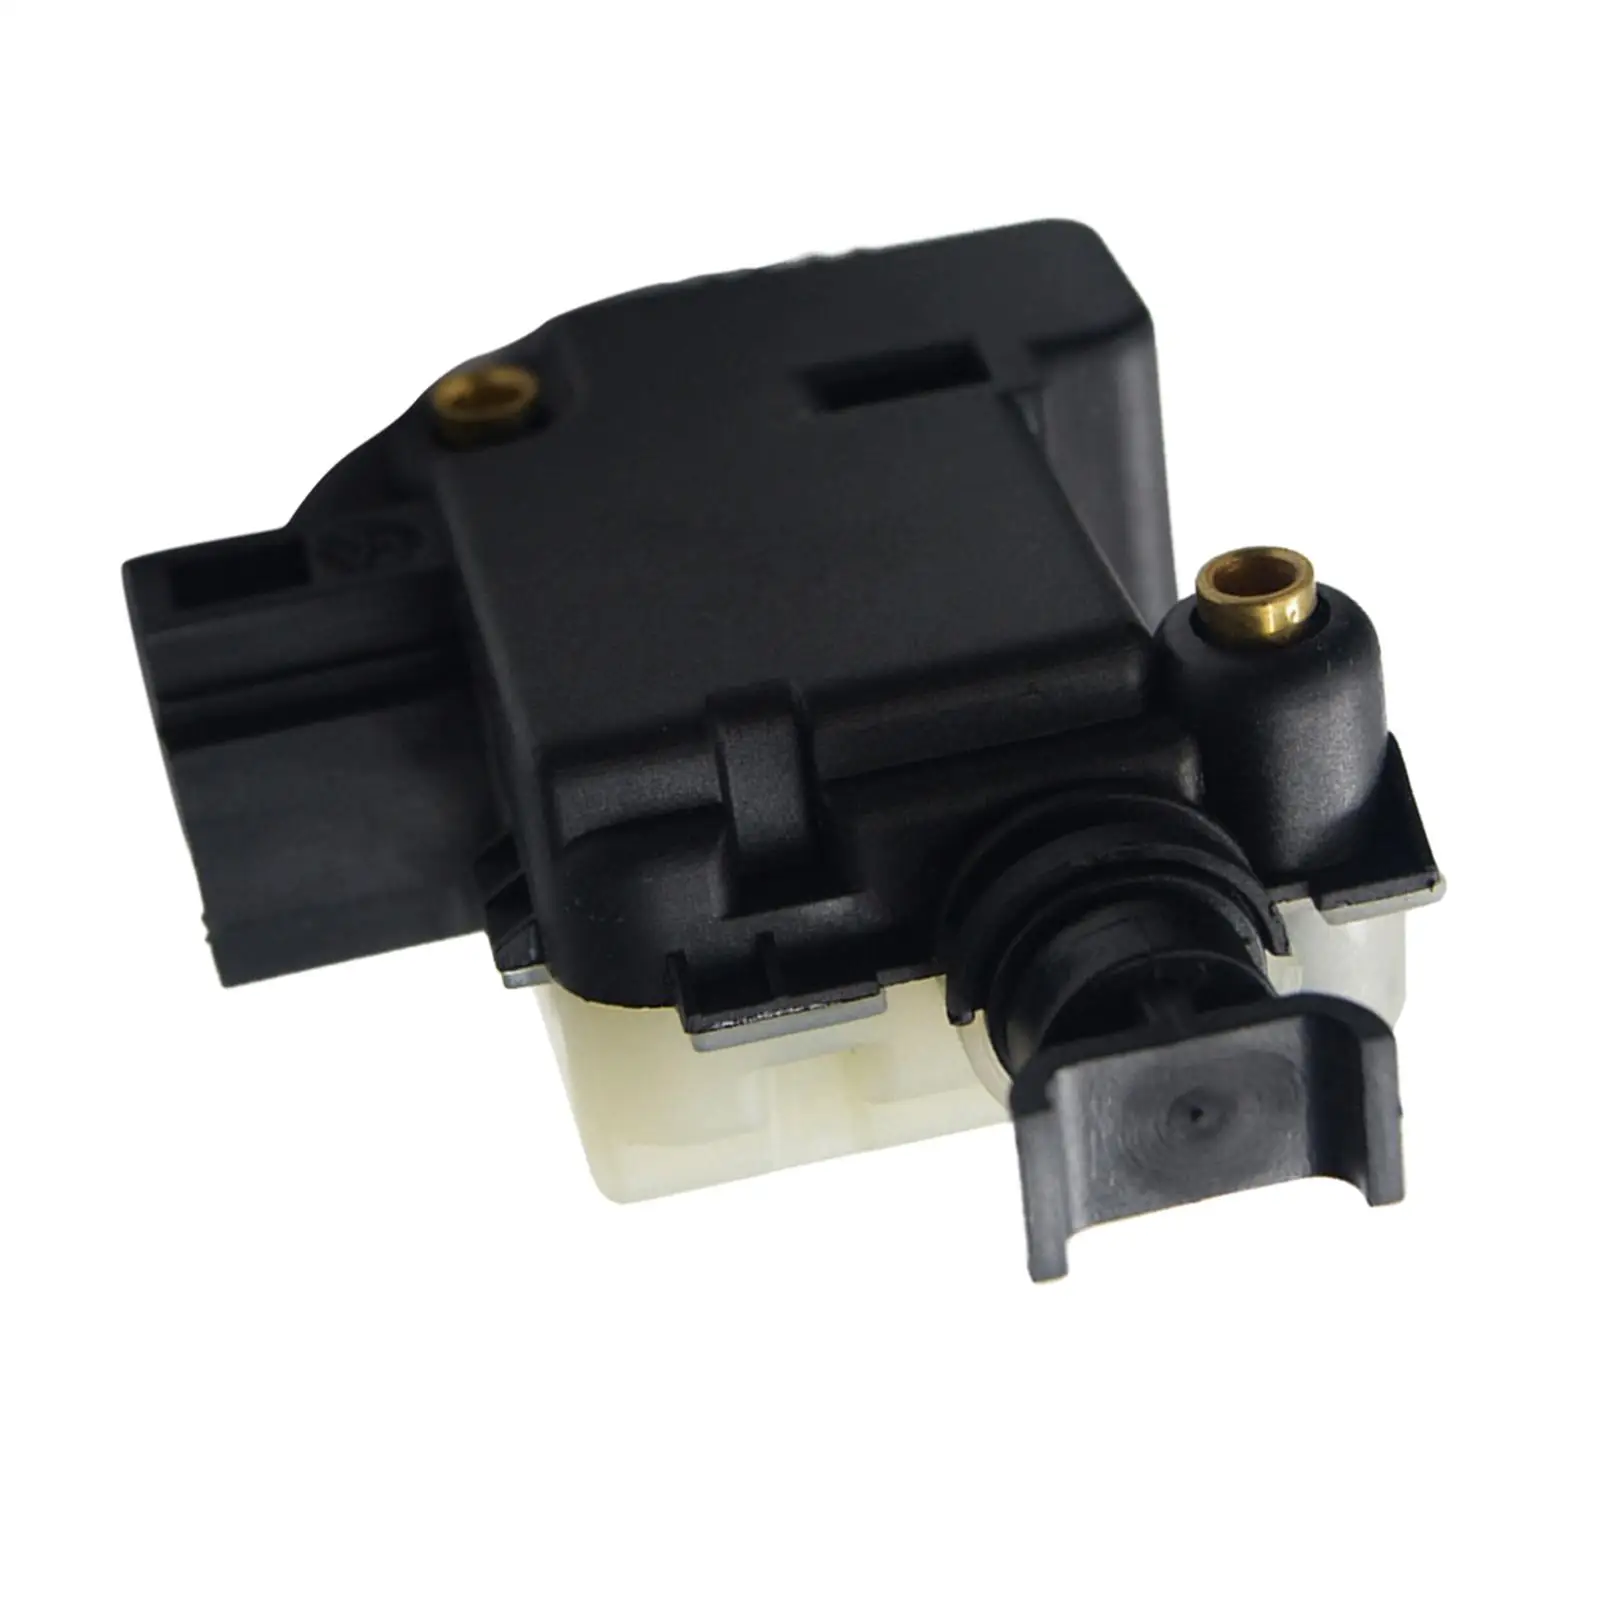 3B5827061B Trunk Tailgate Lock Motor 3B0959781C for 2003-2010 Automotive Accessory Spare Parts Replaces